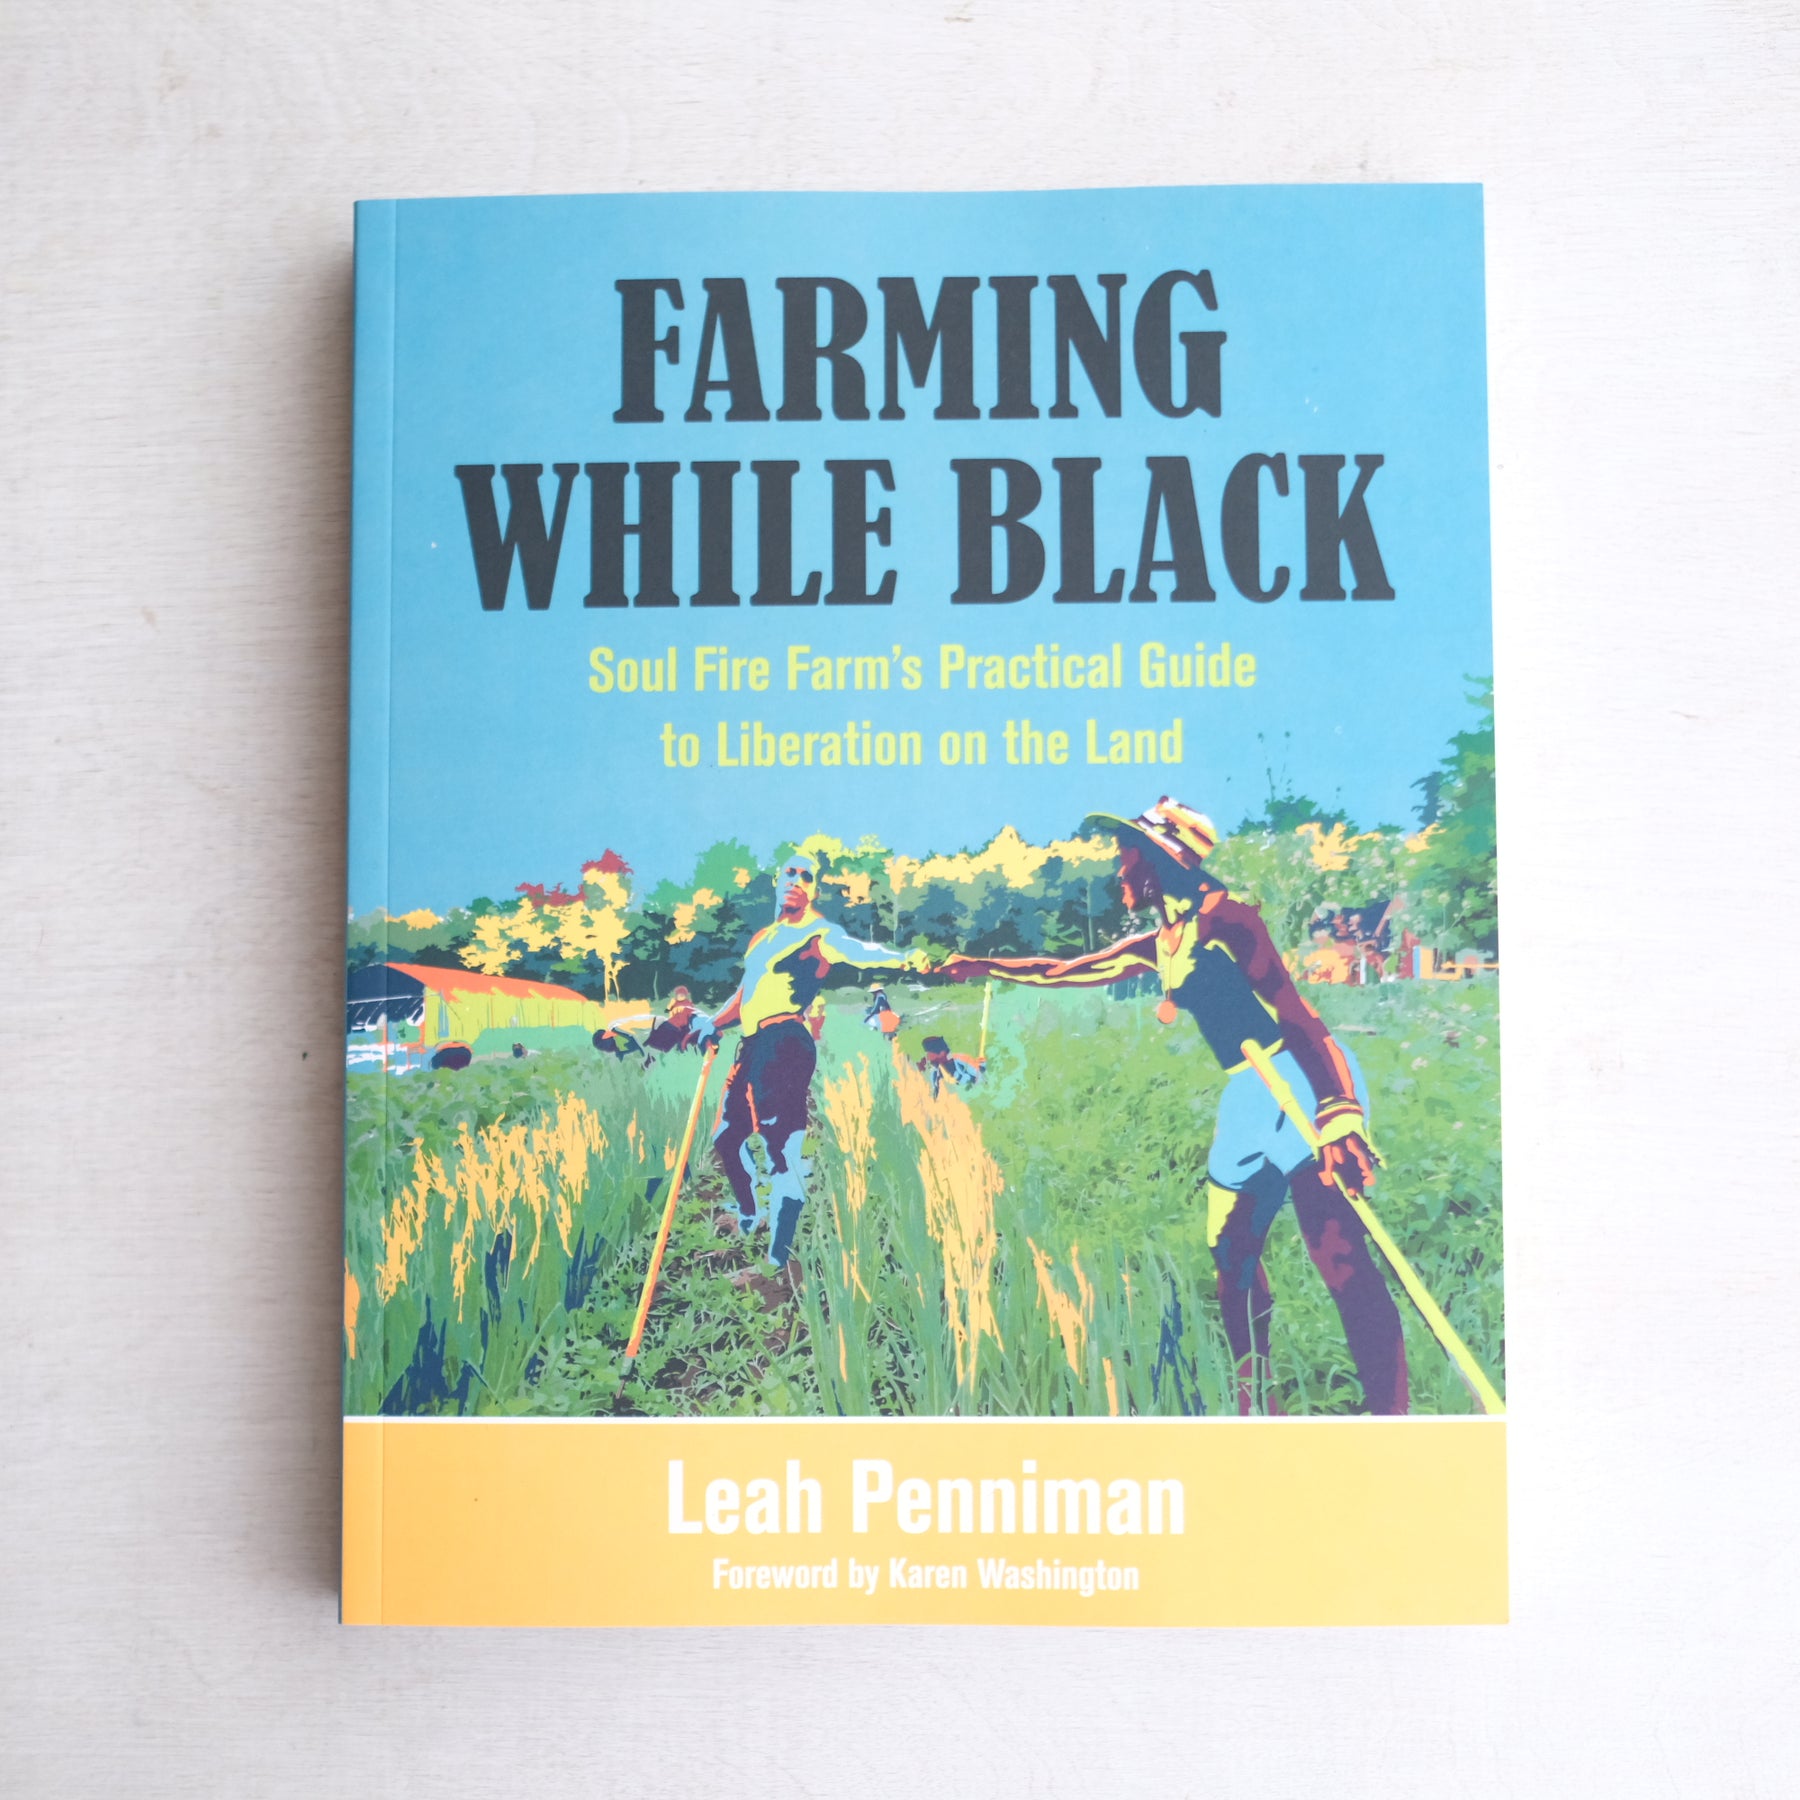 Farming While Black: Soul Fire Farm's Practical Guide to Liberation on the Land by Leah Penniman